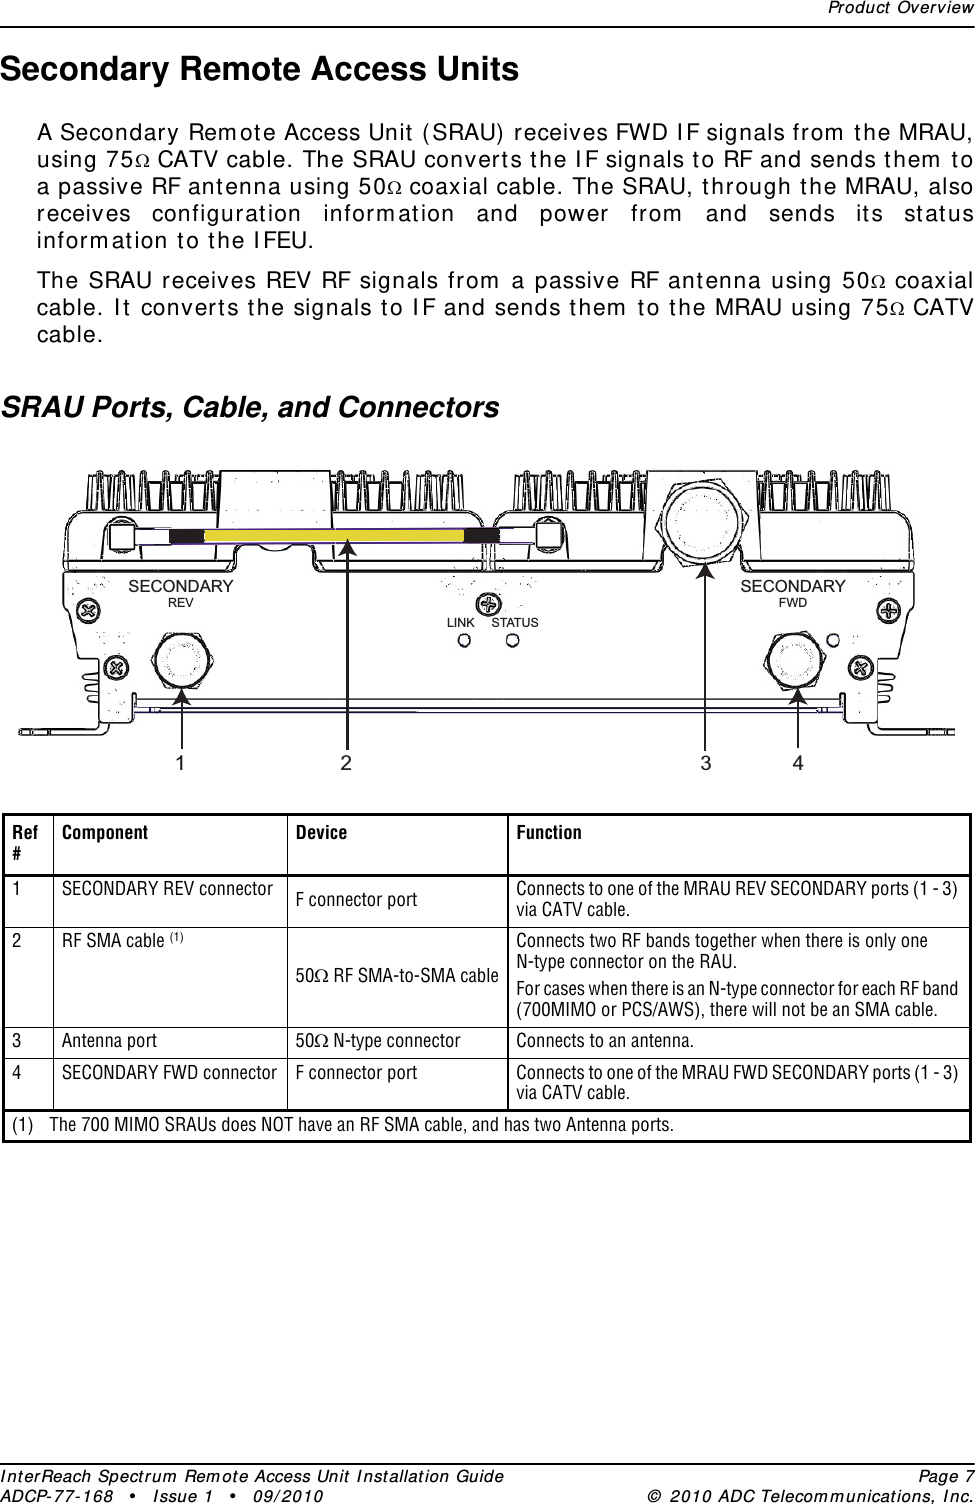 Product OverviewInterReach Spectrum Remote Access Unit Installation Guide Page 7ADCP-77-168 • Issue 1 • 09/2010 © 2010 ADC Telecommunications, Inc.Secondary Remote Access UnitsA Secondary Remote Access Unit (SRAU) receives FWD IF signals from the MRAU, using 75 CATV cable. The SRAU converts the IF signals to RF and sends them to a passive RF antenna using 50 coaxial cable. The SRAU, through the MRAU, also receives configuration information and power from and sends its status information to the IFEU.The SRAU receives REV RF signals from a passive RF antenna using 50 coaxial cable. It converts the signals to IF and sends them to the MRAU using 75 CATV cable. SRAU Ports, Cable, and ConnectorsRef #Component Device Function1SECONDARY REV connector F connector port Connects to one of the MRAU REV SECONDARY ports (1 - 3) via CATV cable.2RF SMA cable (1) 50 RF SMA-to-SMA cableConnects two RF bands together when there is only one N-type connector on the RAU.For cases when there is an N-type connector for each RF band (700MIMO or PCS/AWS), there will not be an SMA cable.3Antenna port  50 N-type connector Connects to an antenna.4SECONDARY FWD connector F connector port Connects to one of the MRAU FWD SECONDARY ports (1 - 3) via CATV cable.(1) The 700 MIMO SRAUs does NOT have an RF SMA cable, and has two Antenna ports.14LINK STATUSSECONDARYREVSECONDARYFWD23